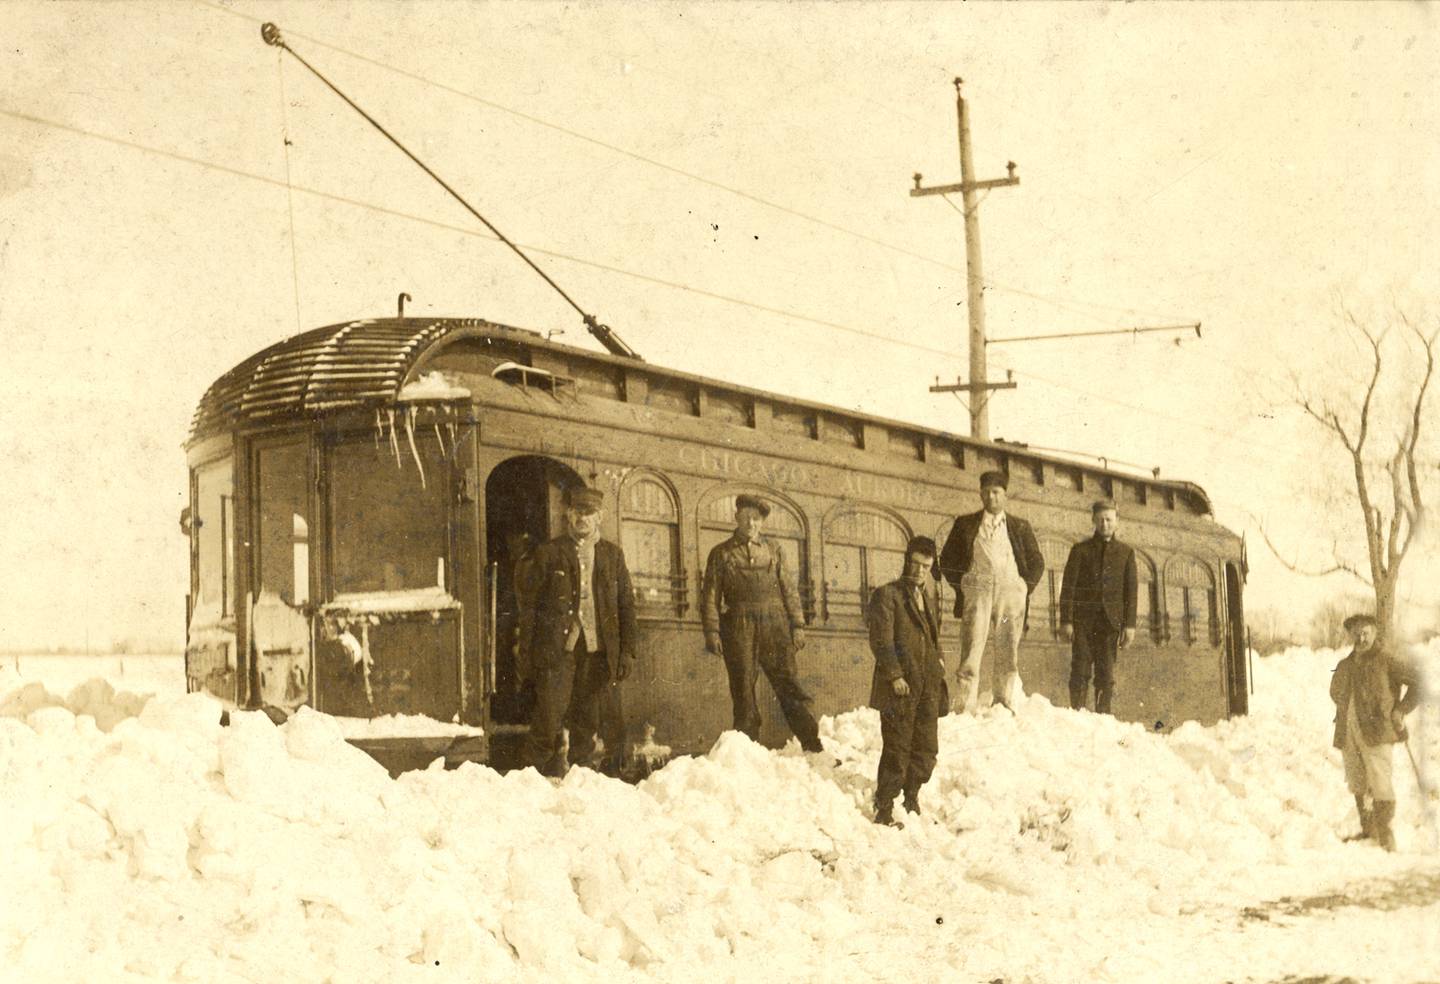 A heavy snow blanketed the tracks and slowed passage in the winter of 1917-1918 for this Fox & Illinois Union trolley near Oswego. (Photo provided by the Little White School Museum)